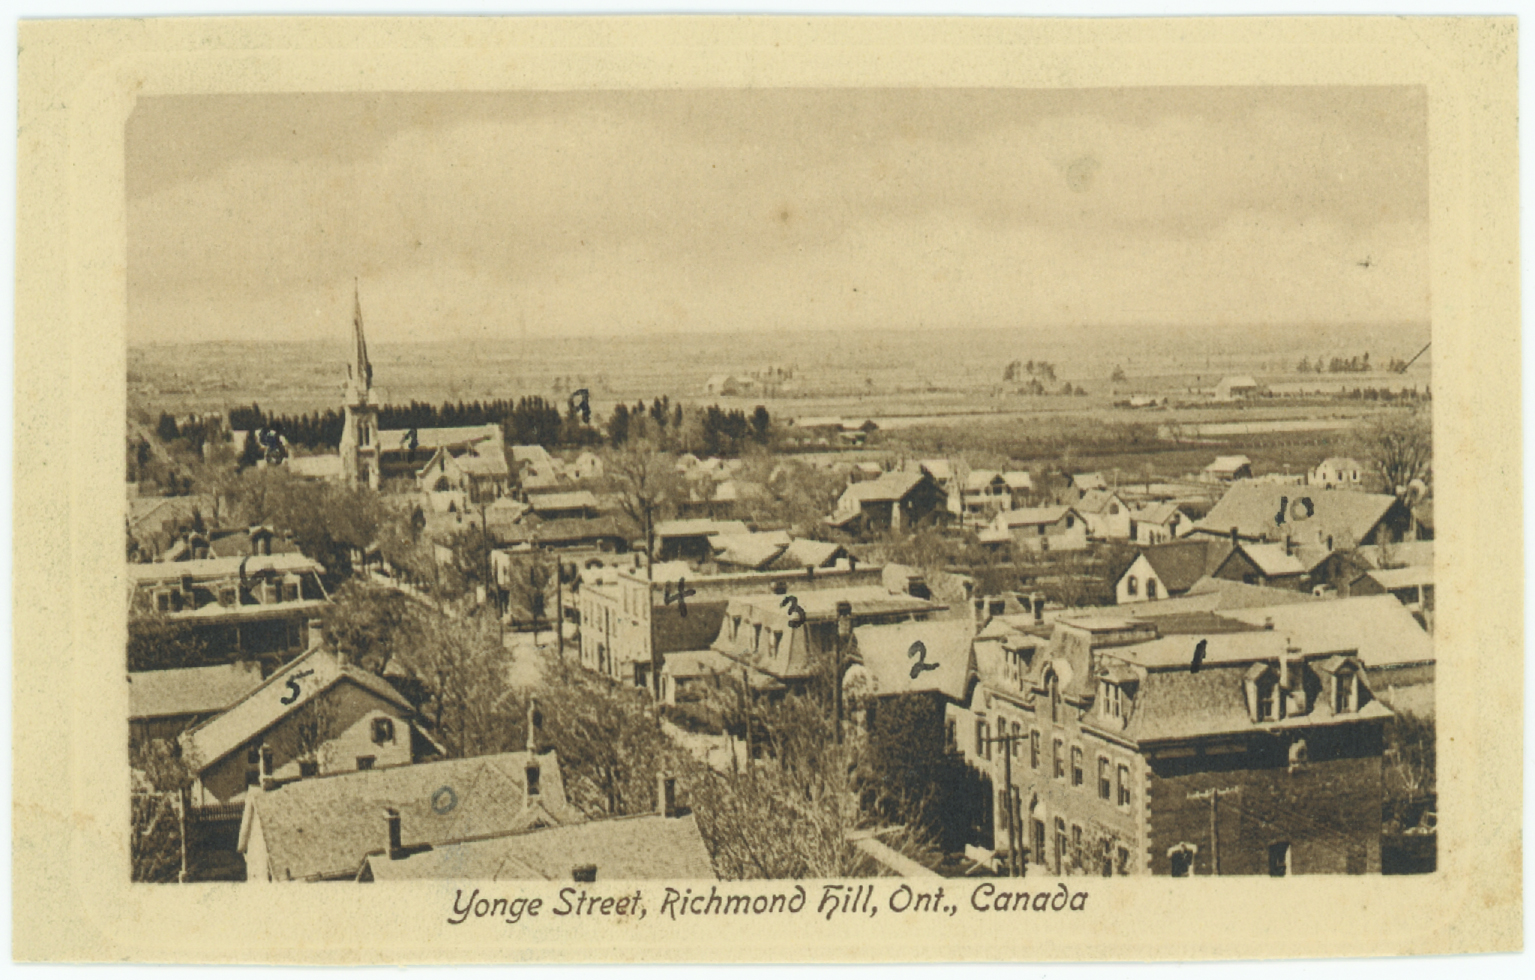 Postcard of Yonge Street looking north from the steeple of the Richmond Hill Presbyterian Church in 1908 from the Tweedsmuir History of Richmond Hill. (Richmond Hill Public Library, Tweedsmuir History Fonds)